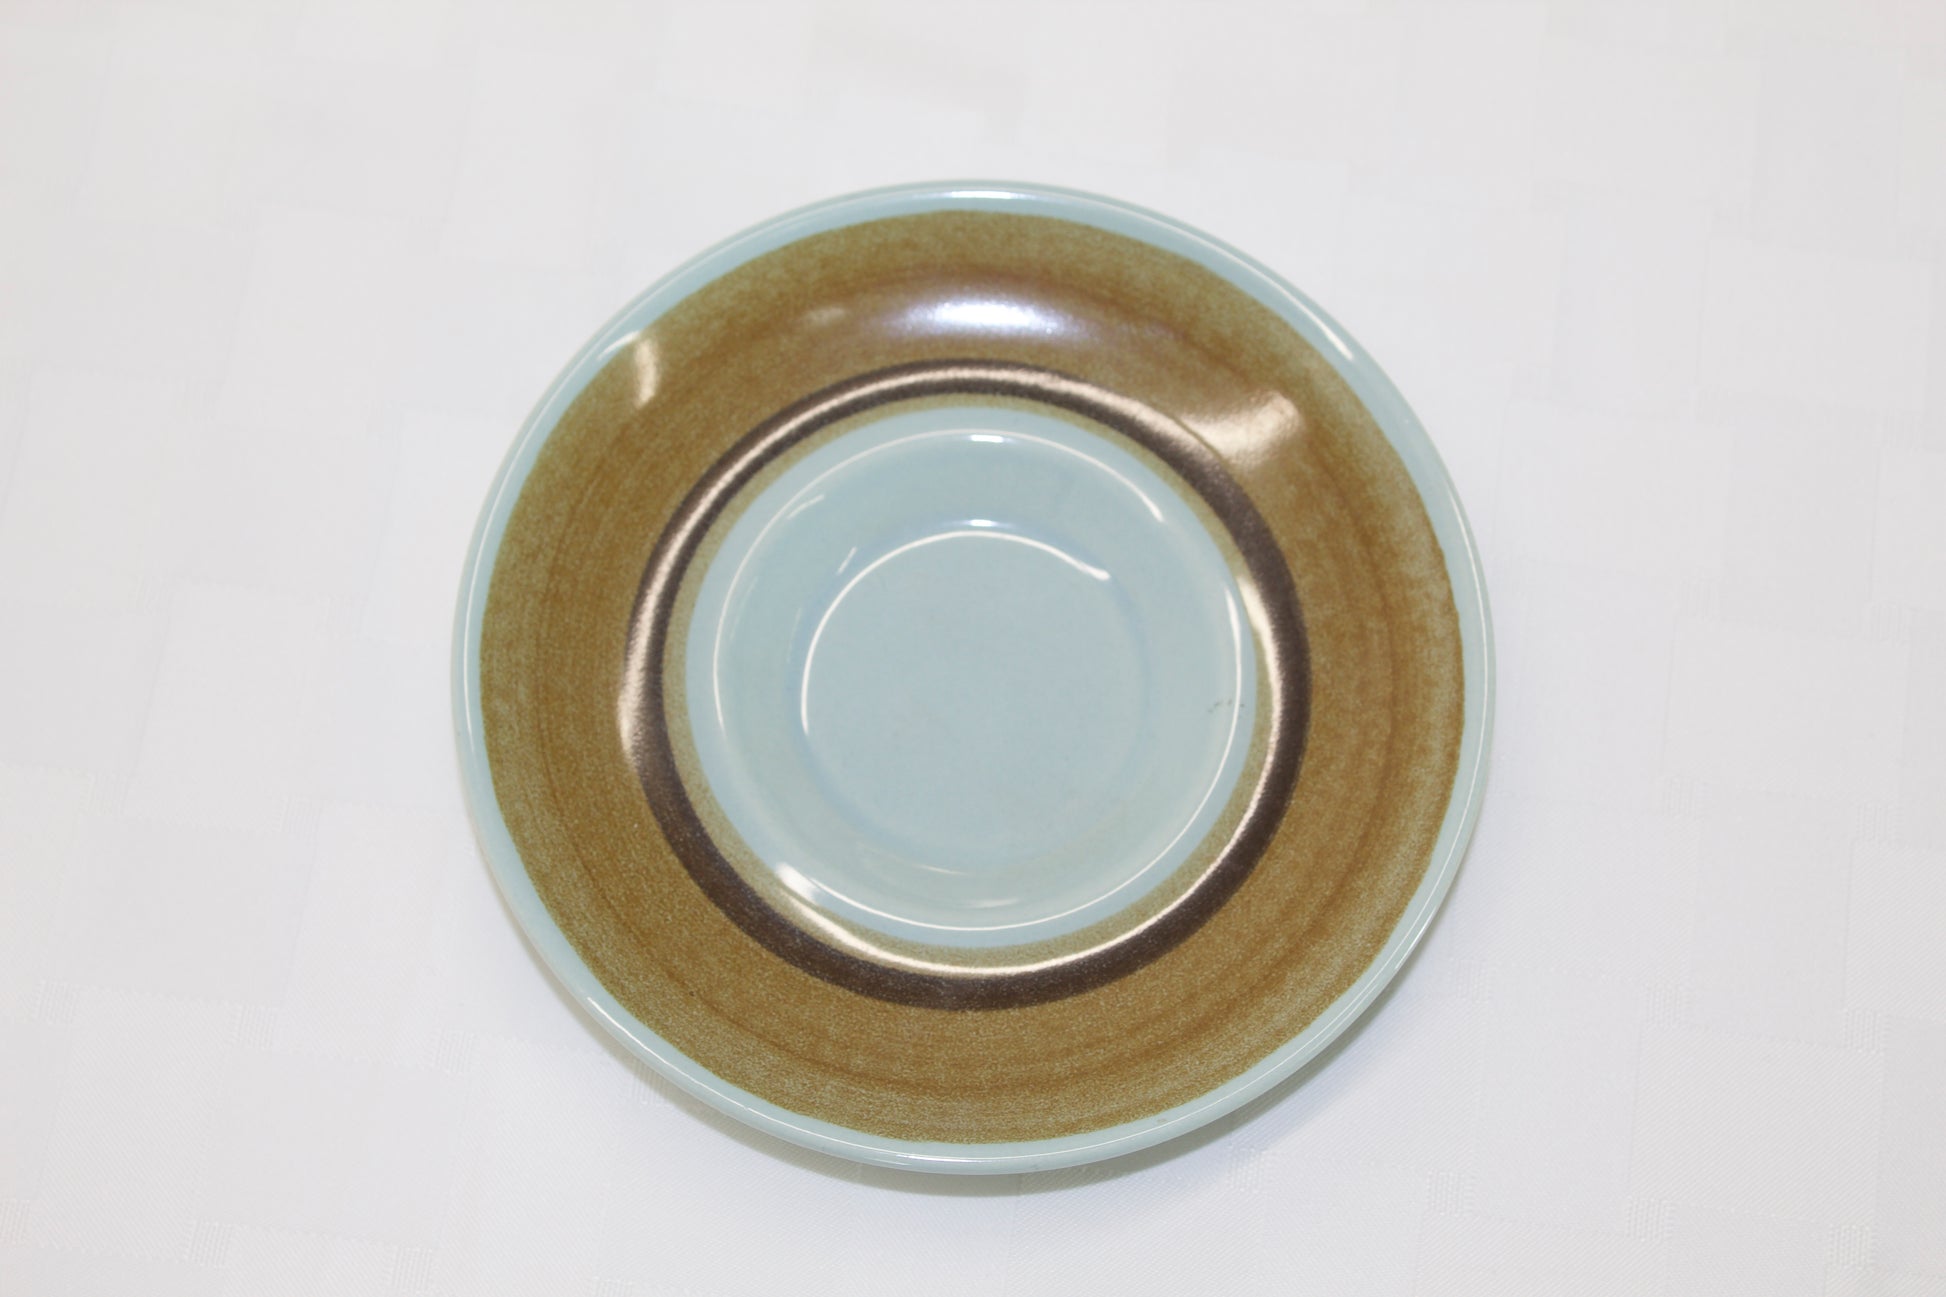 Franciscan Stoneware Saucer in a brown and teal color